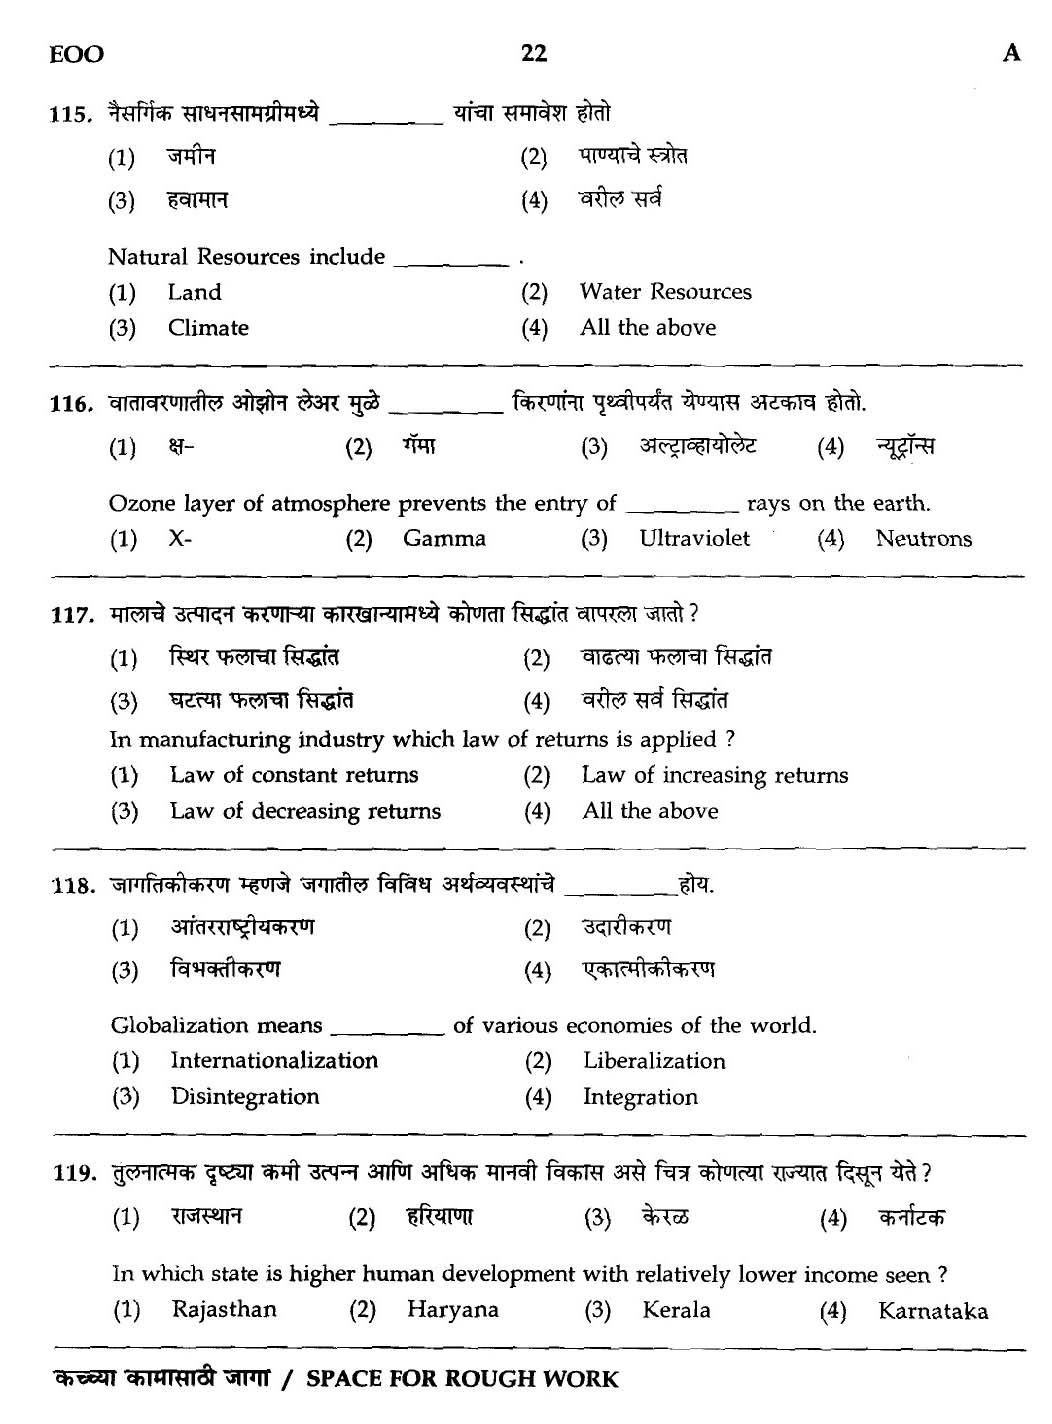 MPSC Agricultural Services Preliminary Exam 2012 Question Paper 21